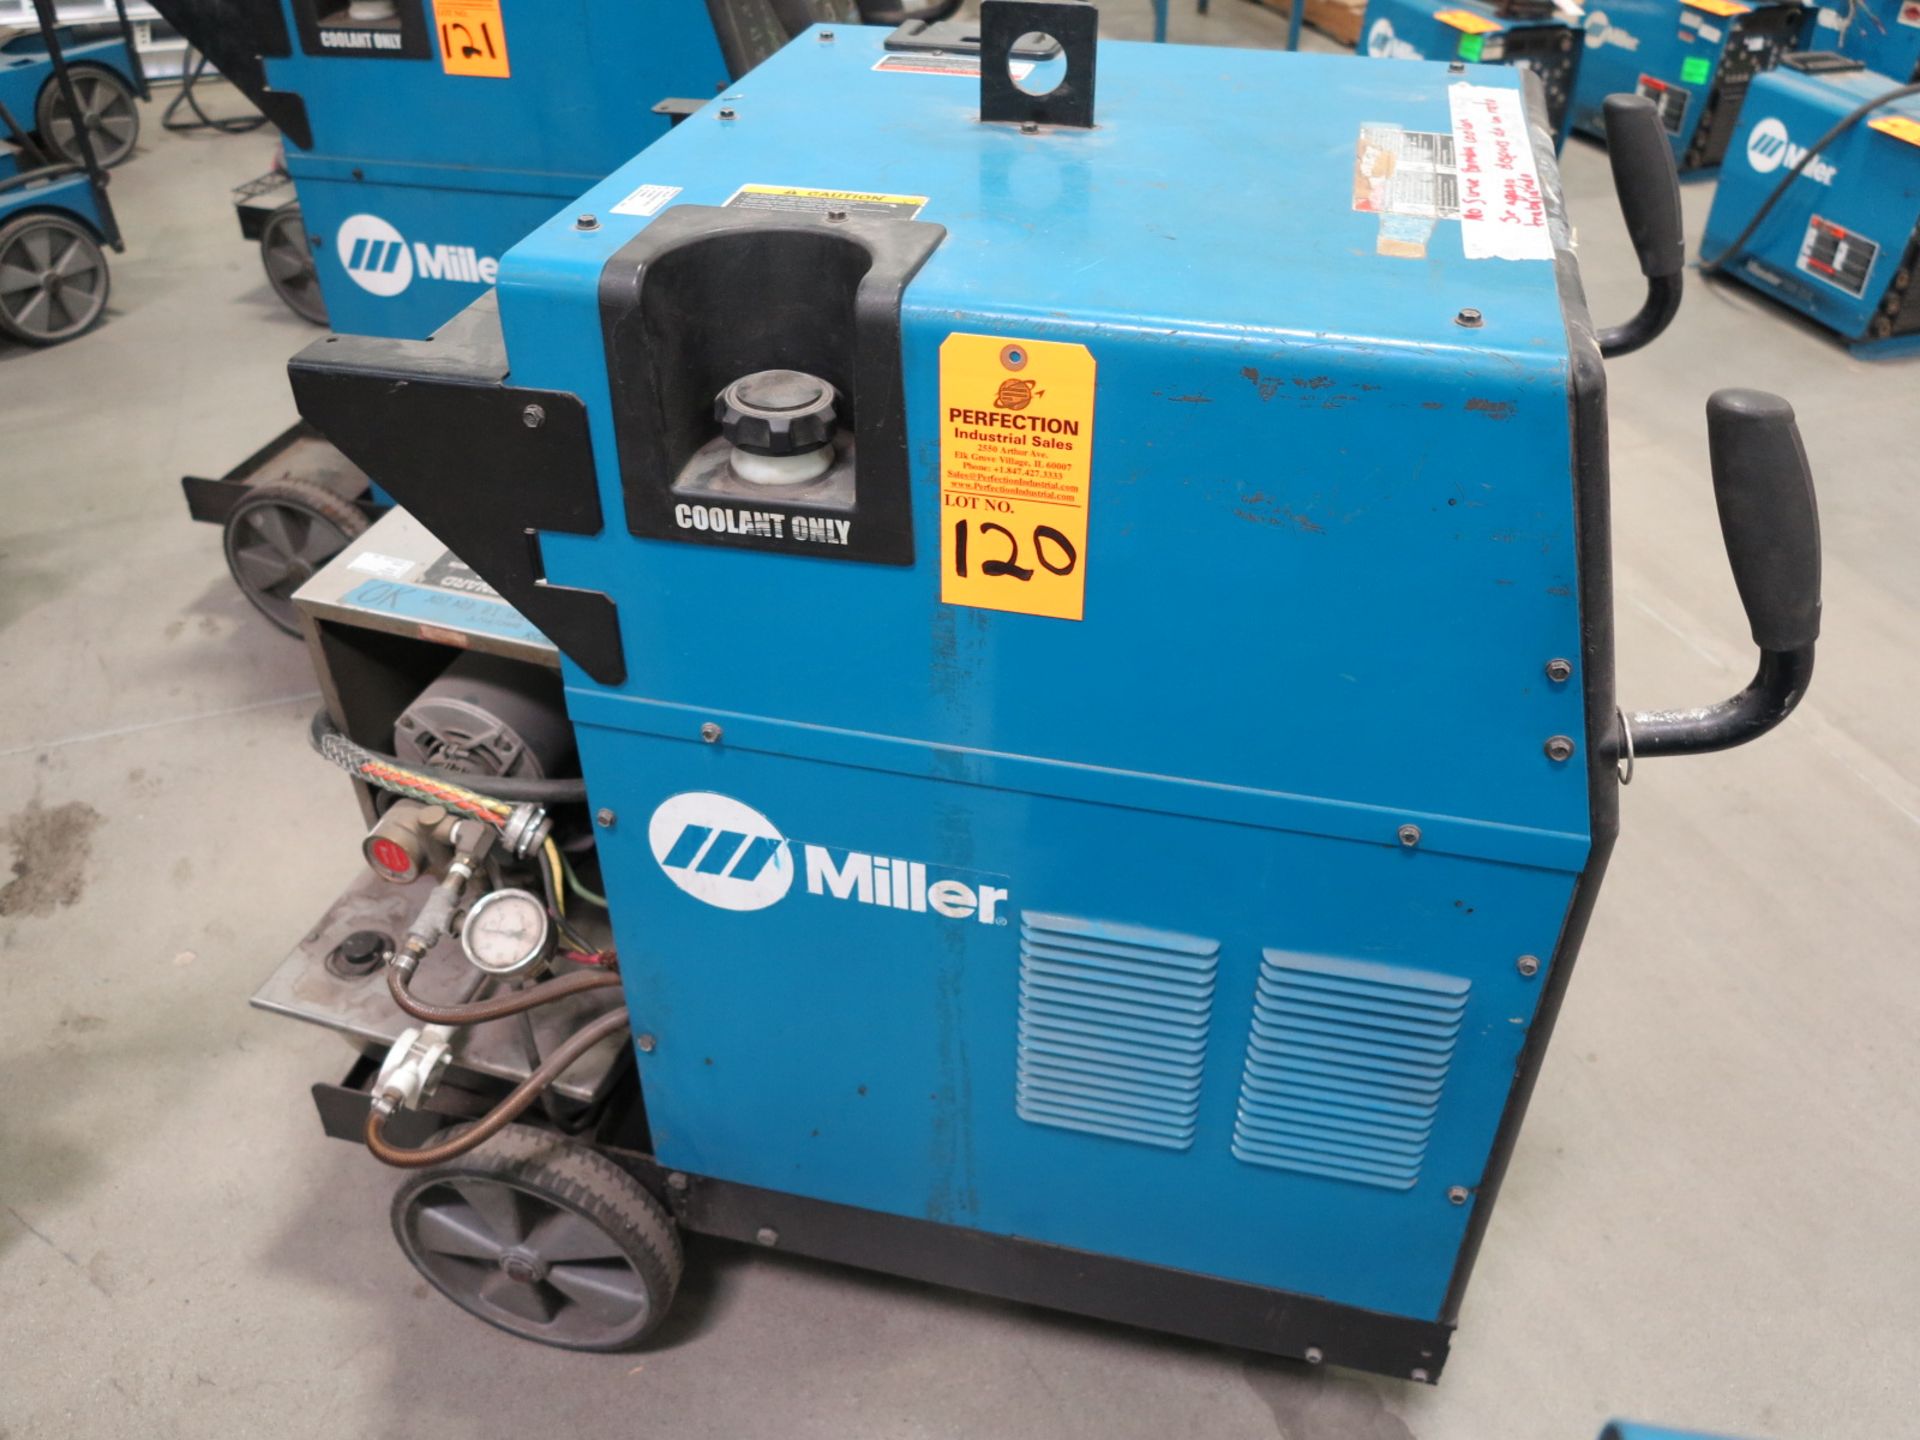 MILLER Syncrowave 350LX Square Wave Power Source, s/n LF135698